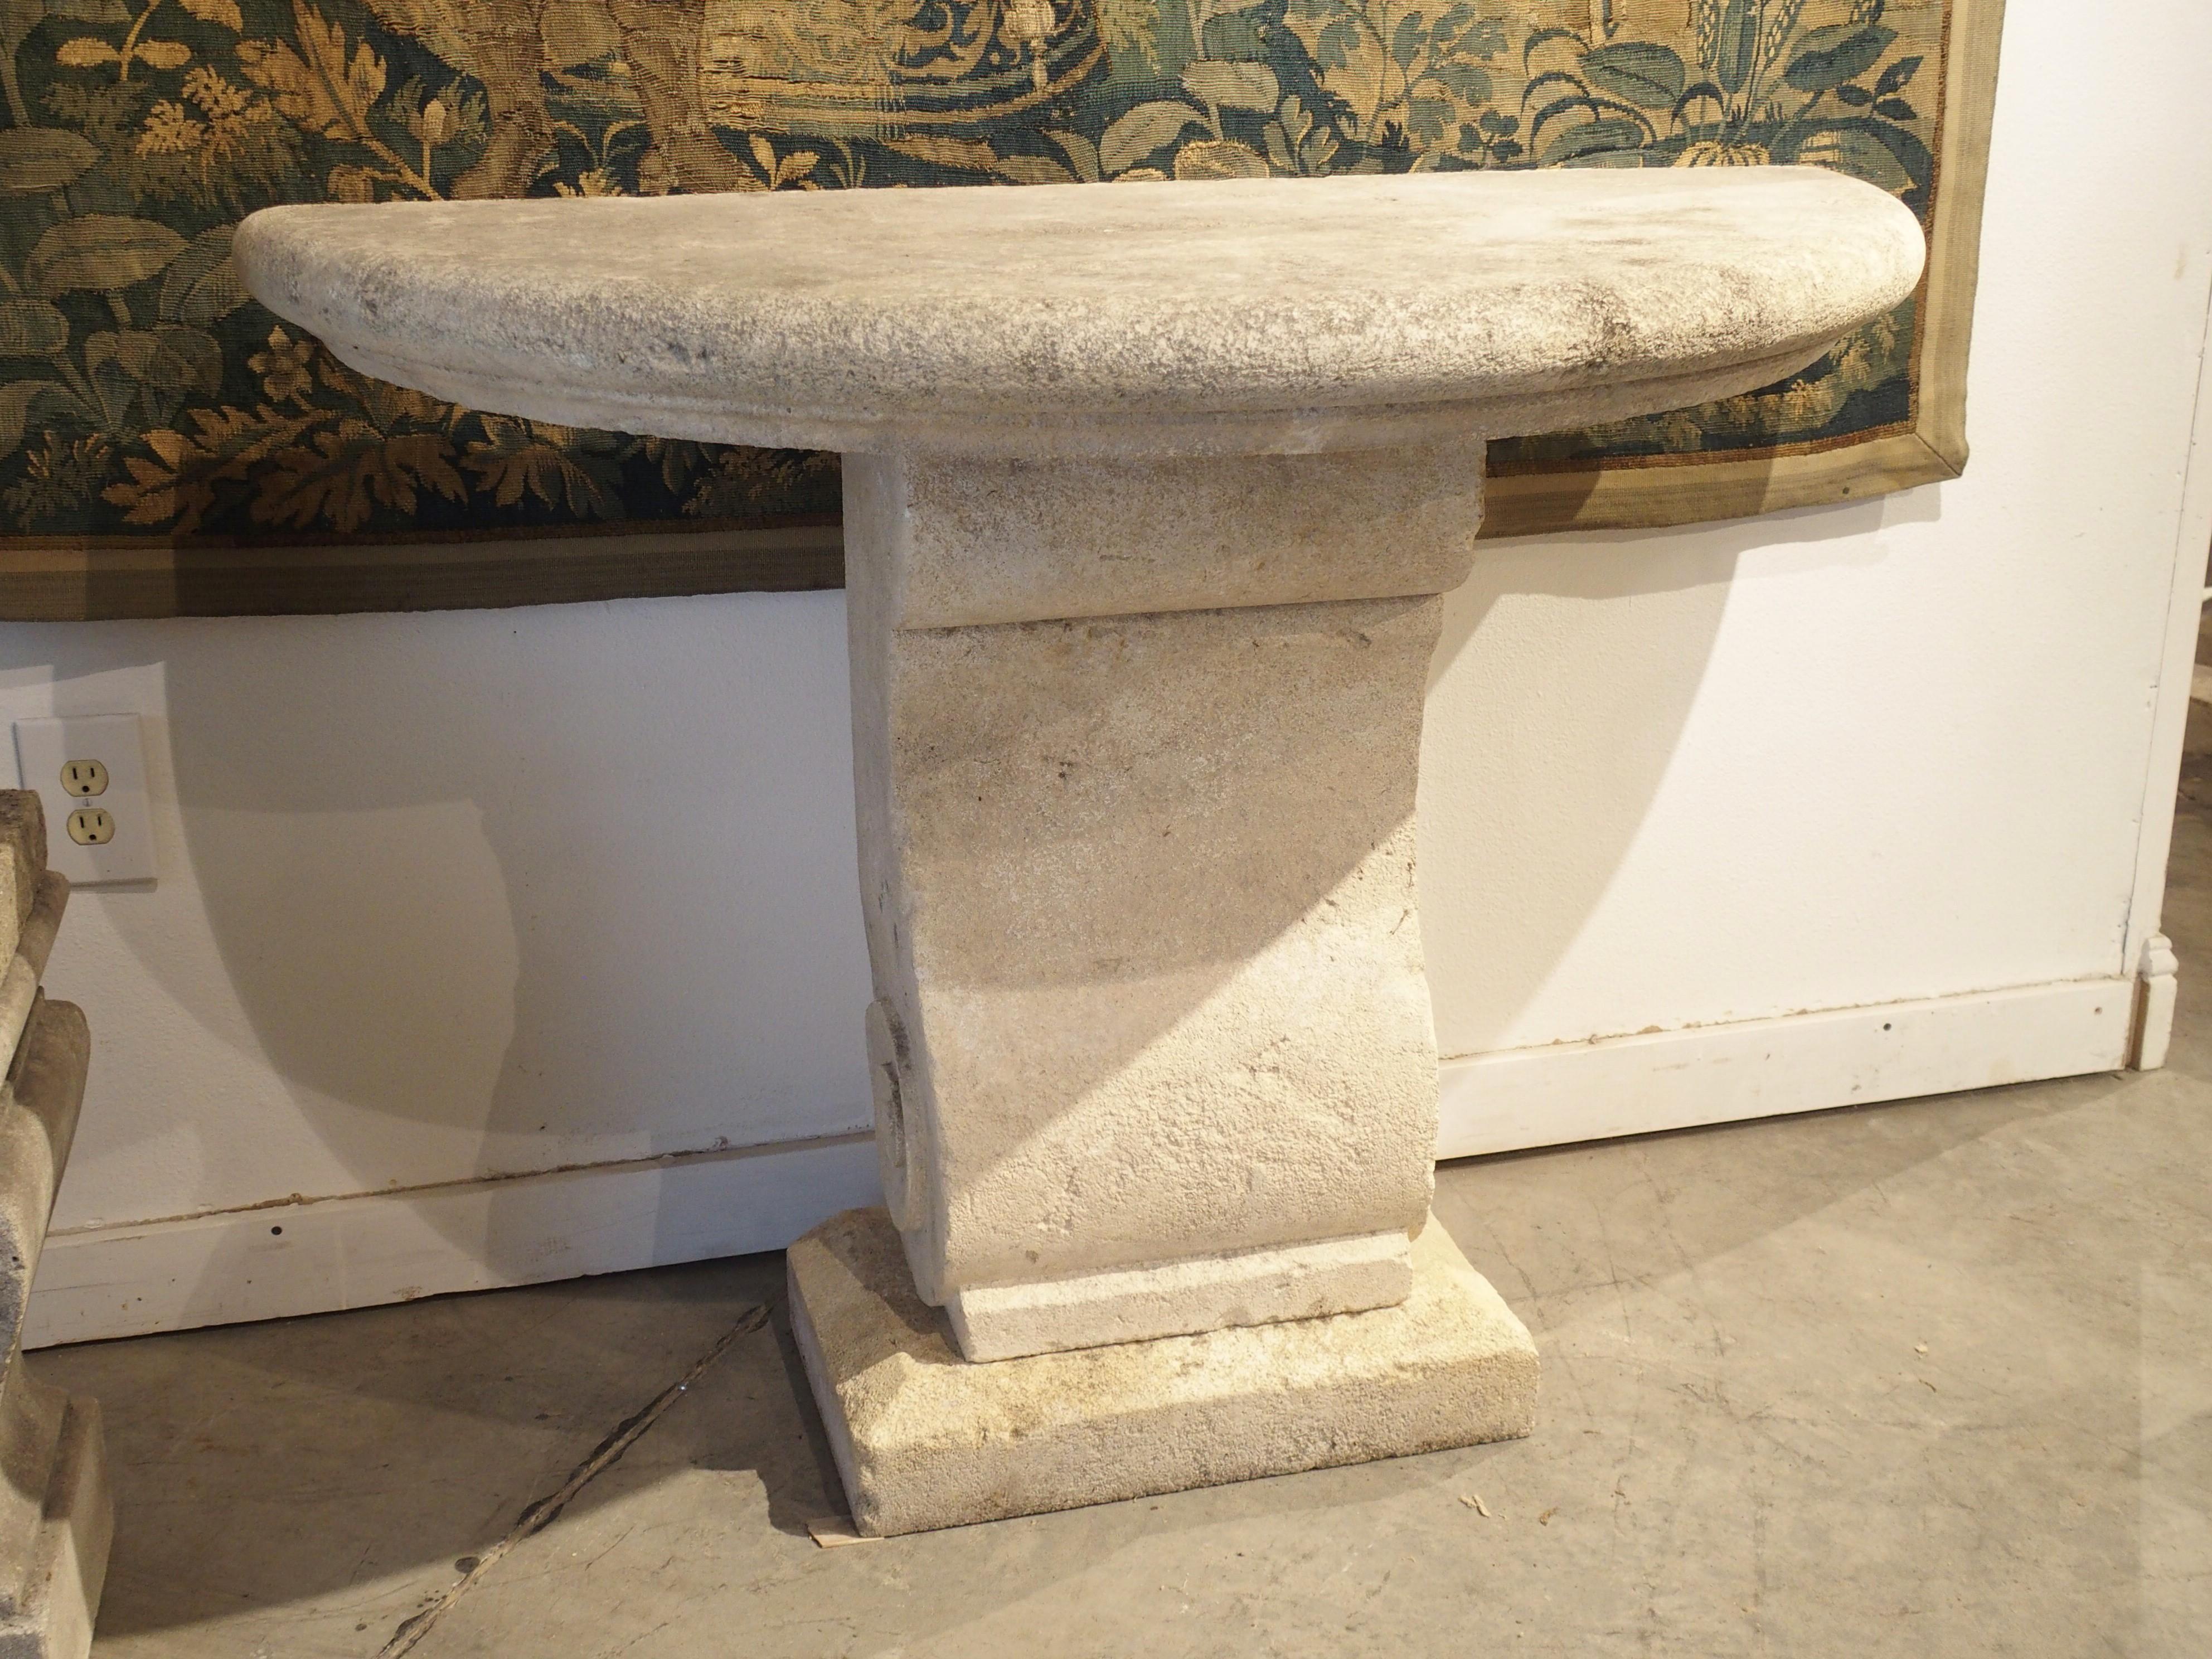 Hand carved in Provence, France, this limestone demilune console has a four inch thick top with a recessed carving above a cavetto molding. A corbel-like column sits beneath the top, supported by a rectangular plinth with beveled edges. The column